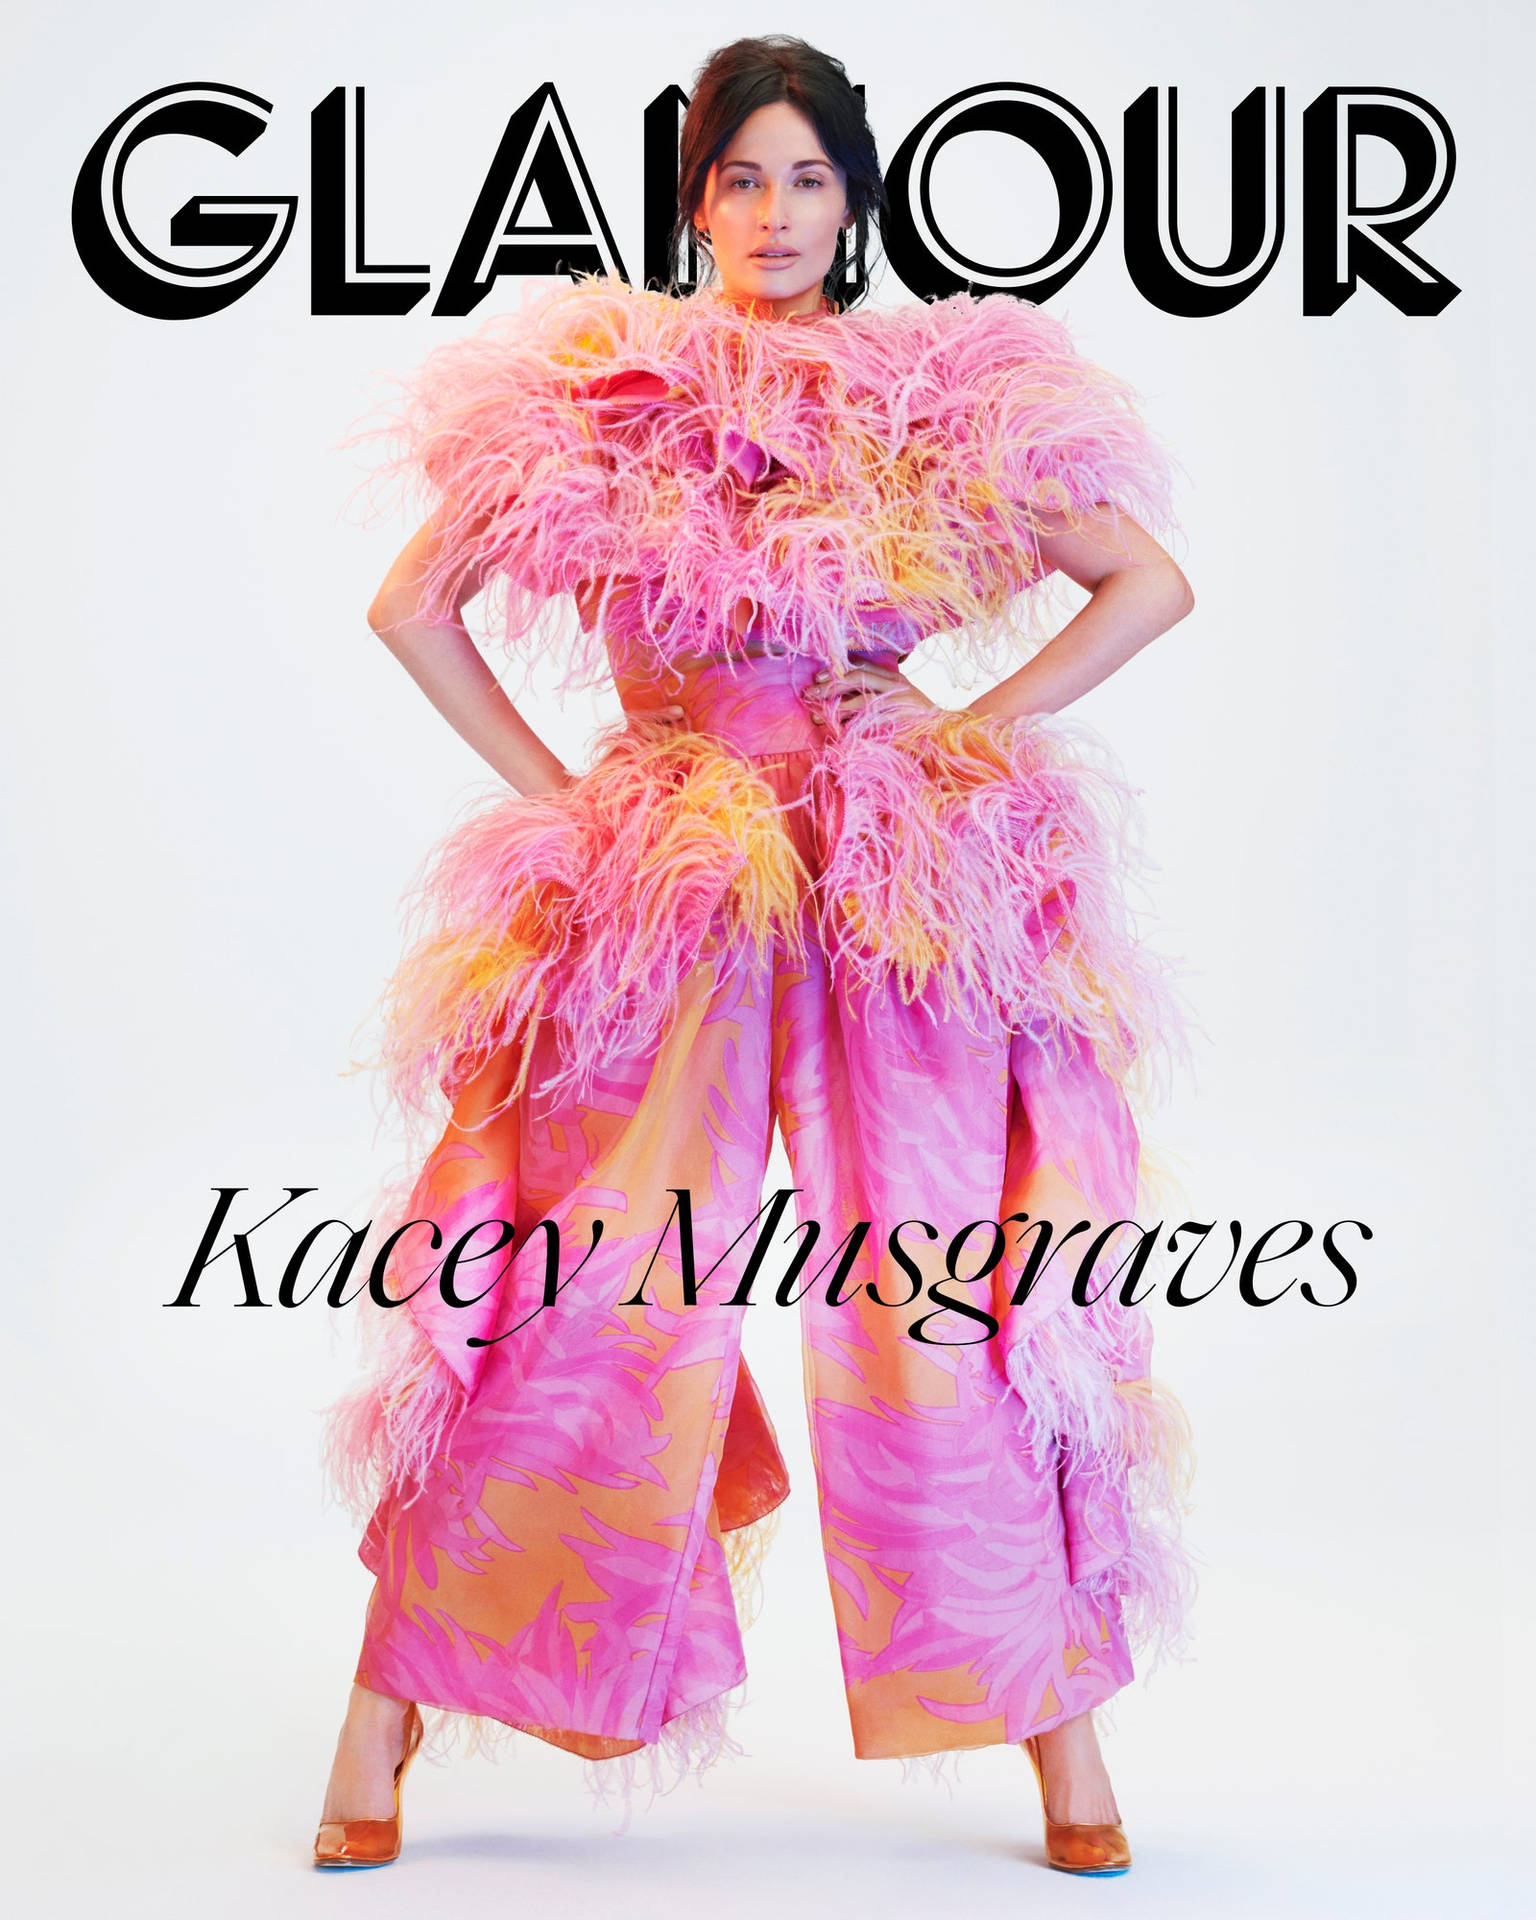 Kacey Musgraves Glamour Pictorial Background